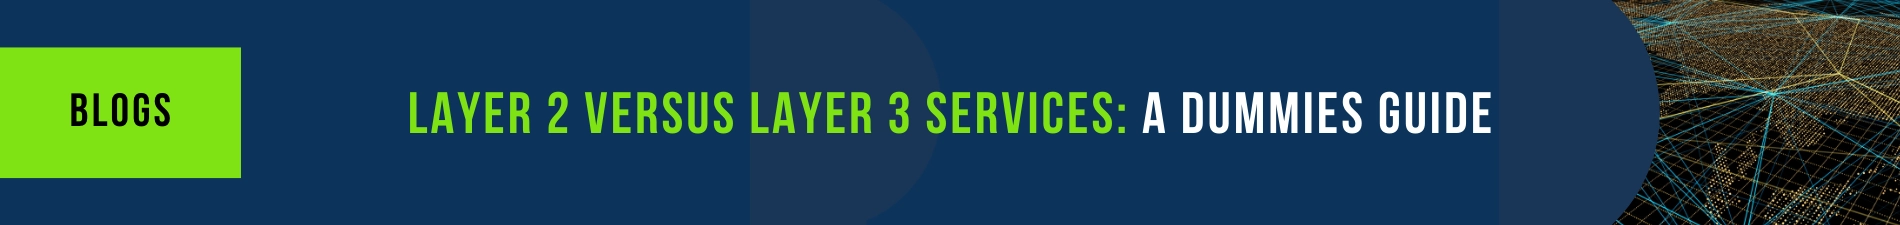 Layer 2 versus Layer 3 services: A Dummies Guide